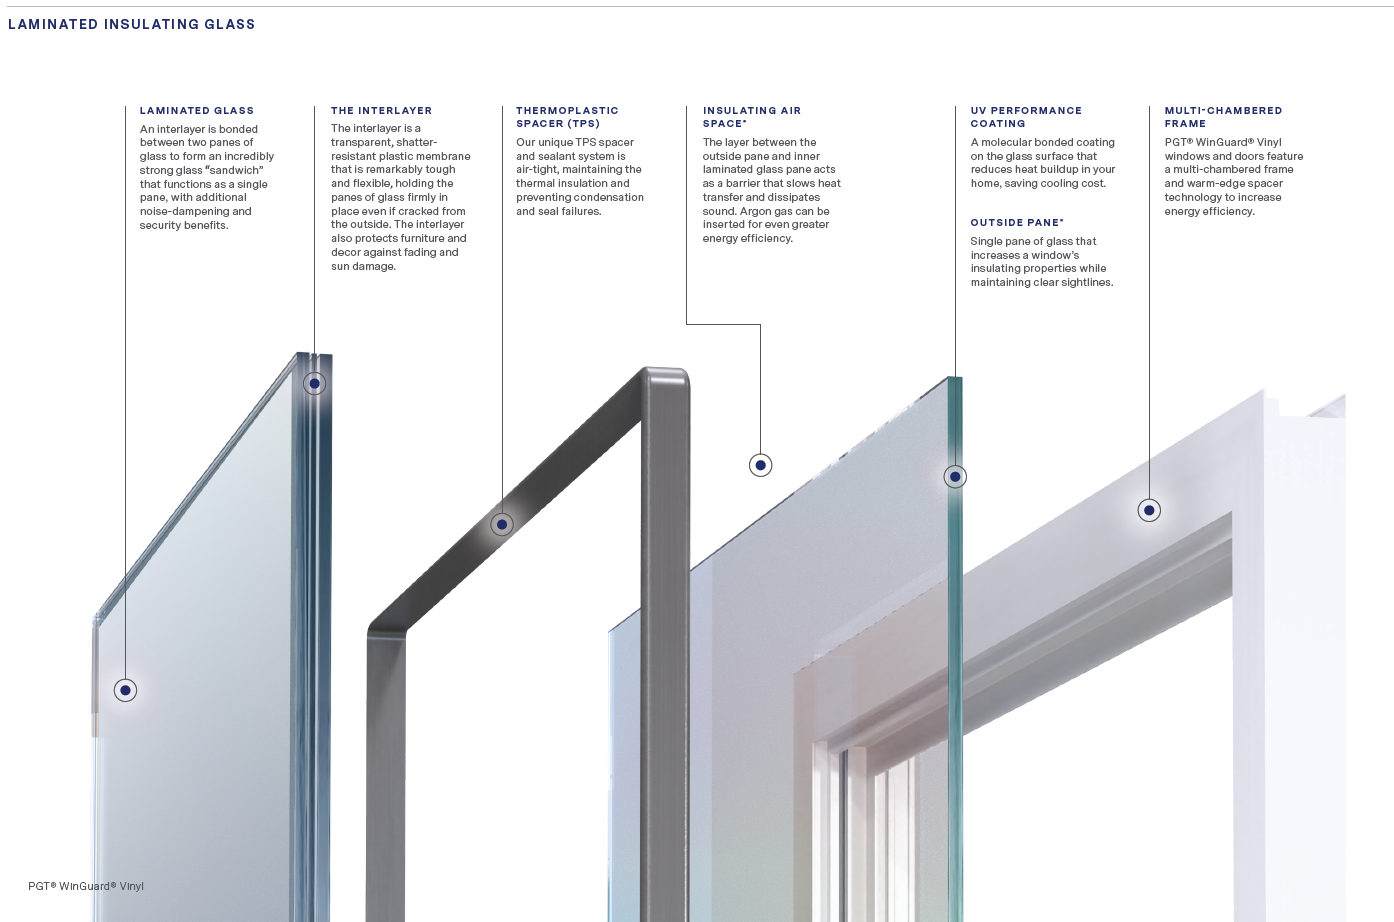 This labeled image shows the different materials used to create a hurricane impact-resistant window with laminated insulating glass. 